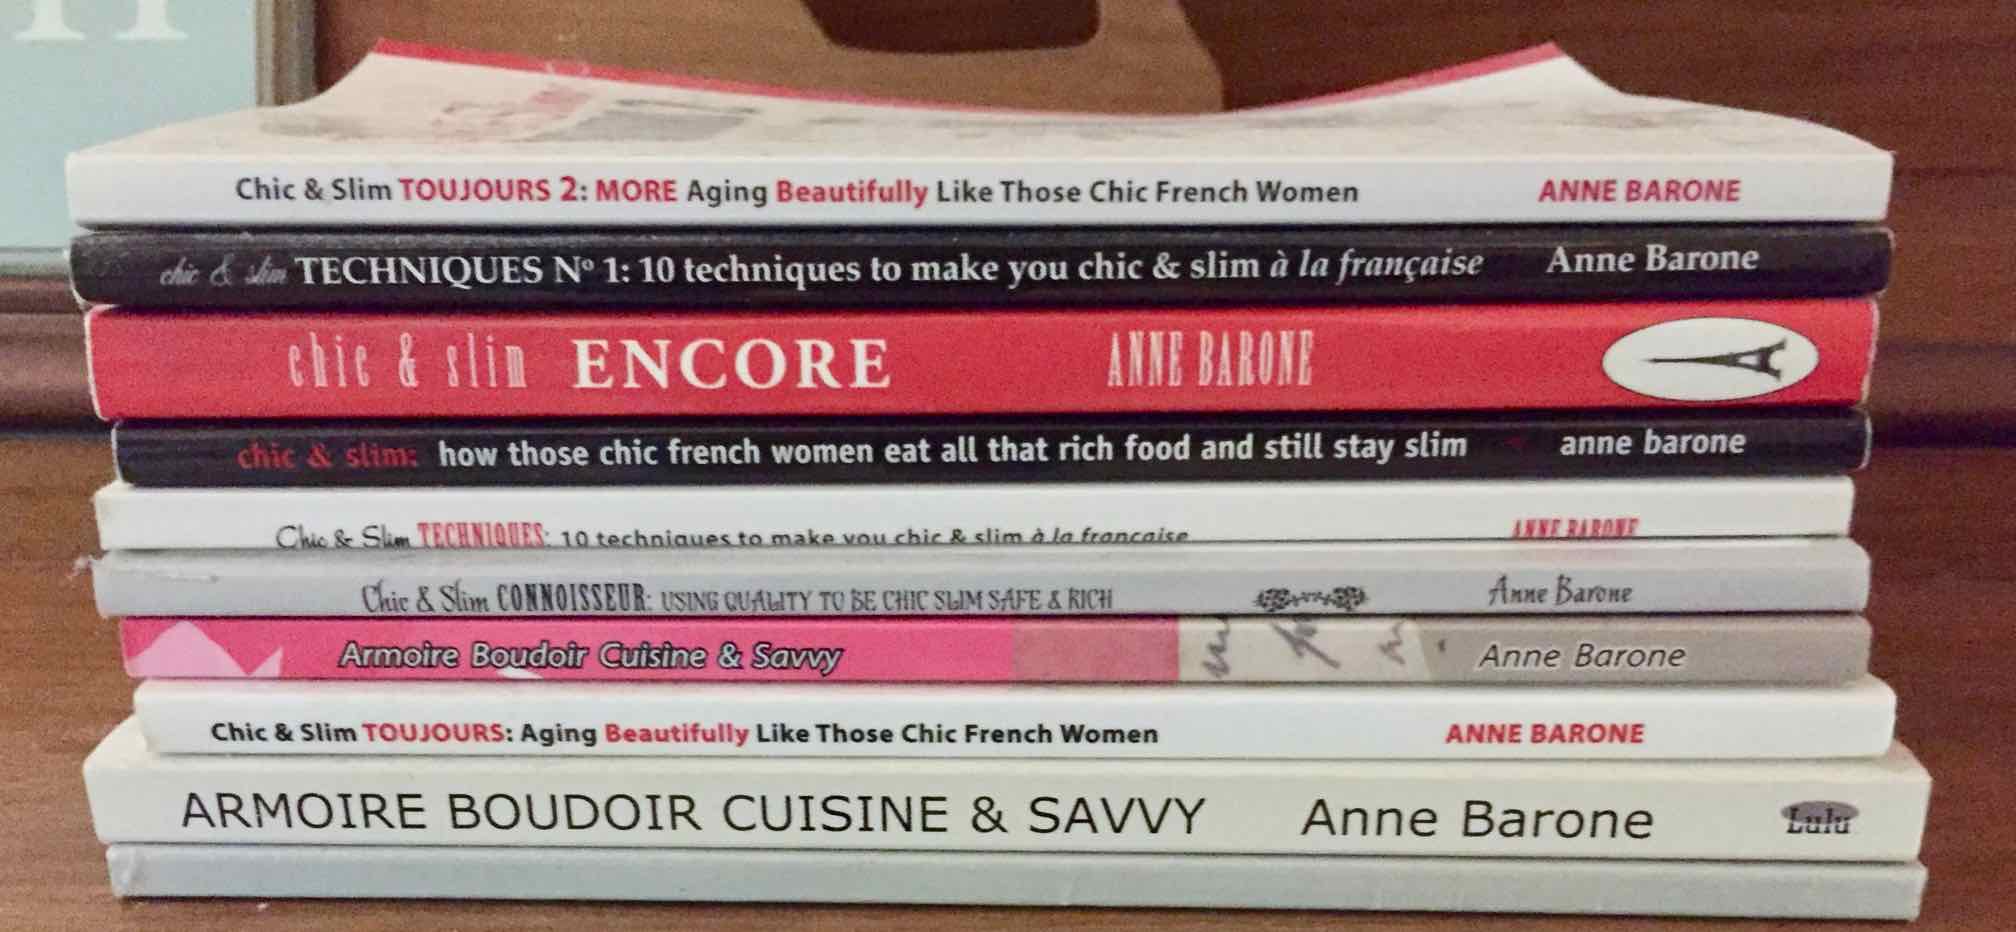 Chic & Slim books recommended for shelter-in-place reading recommendations